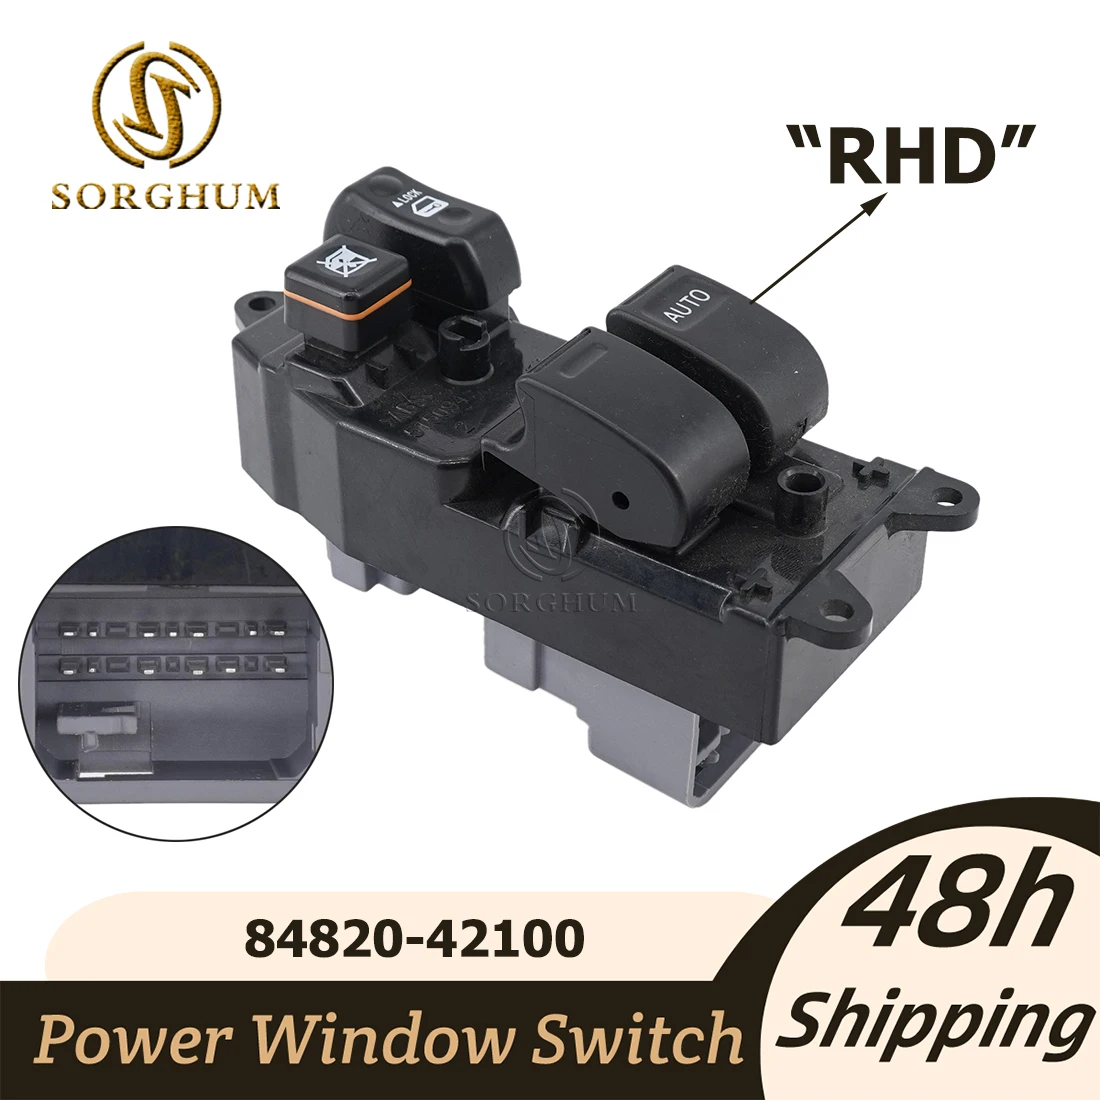 

Sorghum For Toyota Corolla Power Master Window Switch RHD Driver Side For Toyota Corolla Crown Centuryvg4 84820-42100 8482042100